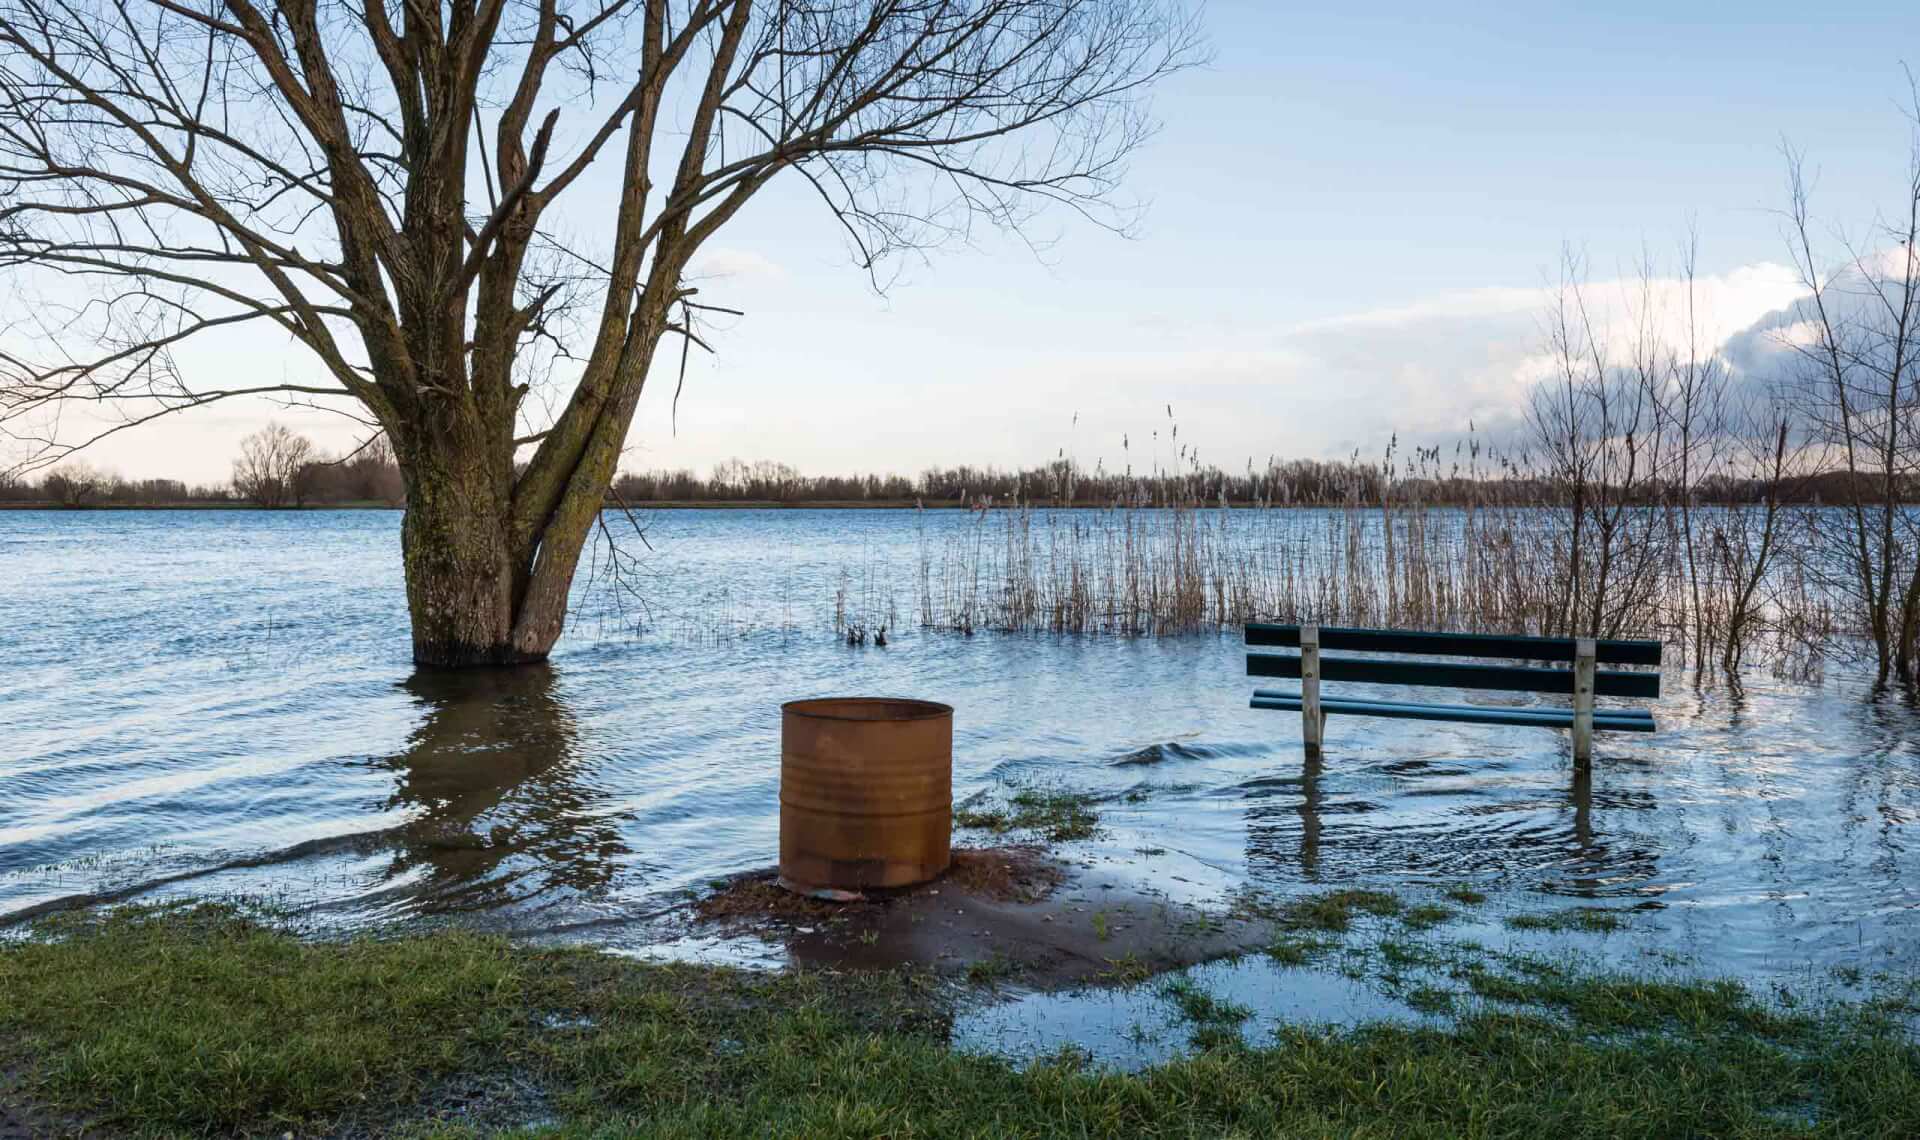 A bench, a bare tree and a rusty oil drum in the water due to the high water level of the river.